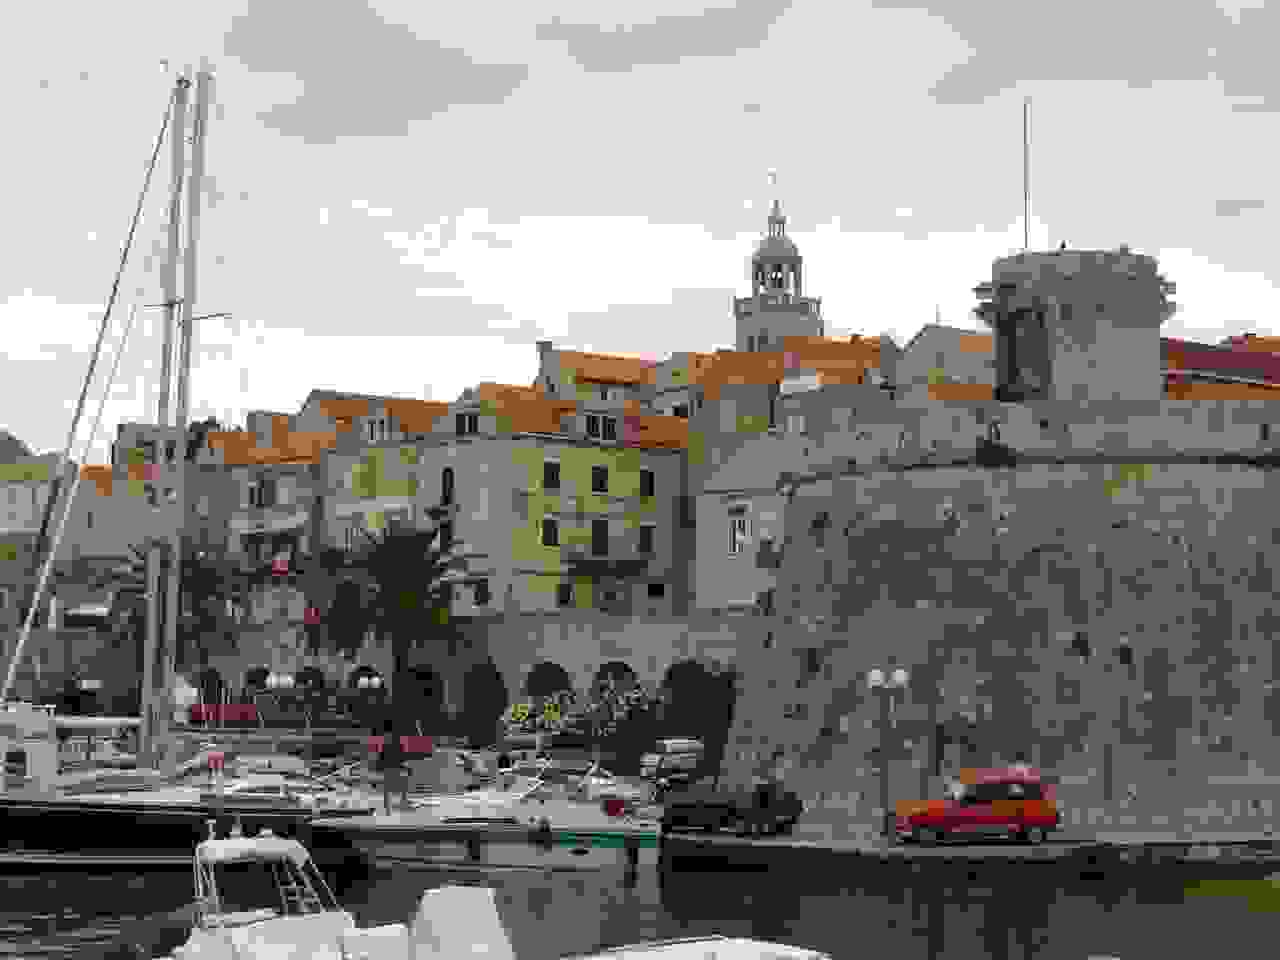 Korcula old town